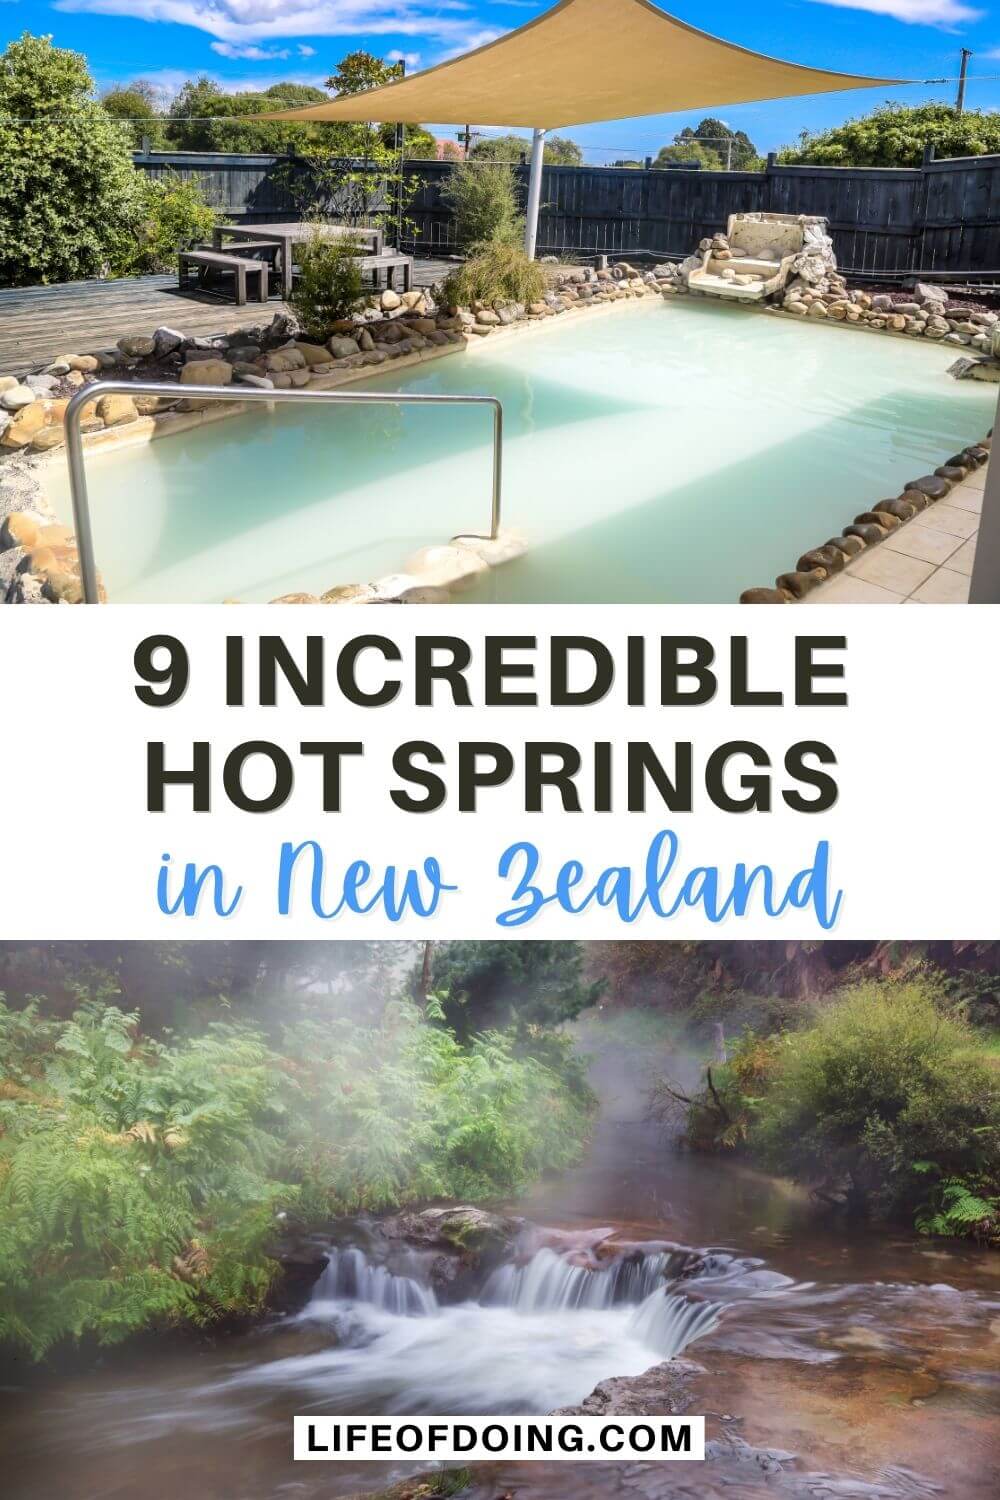 Top photo is a milky blue hot spring at Hell's Gate Geothermal Reserve and bottom photo is a thermal waterfall at Kerosene Creek in Rotorua